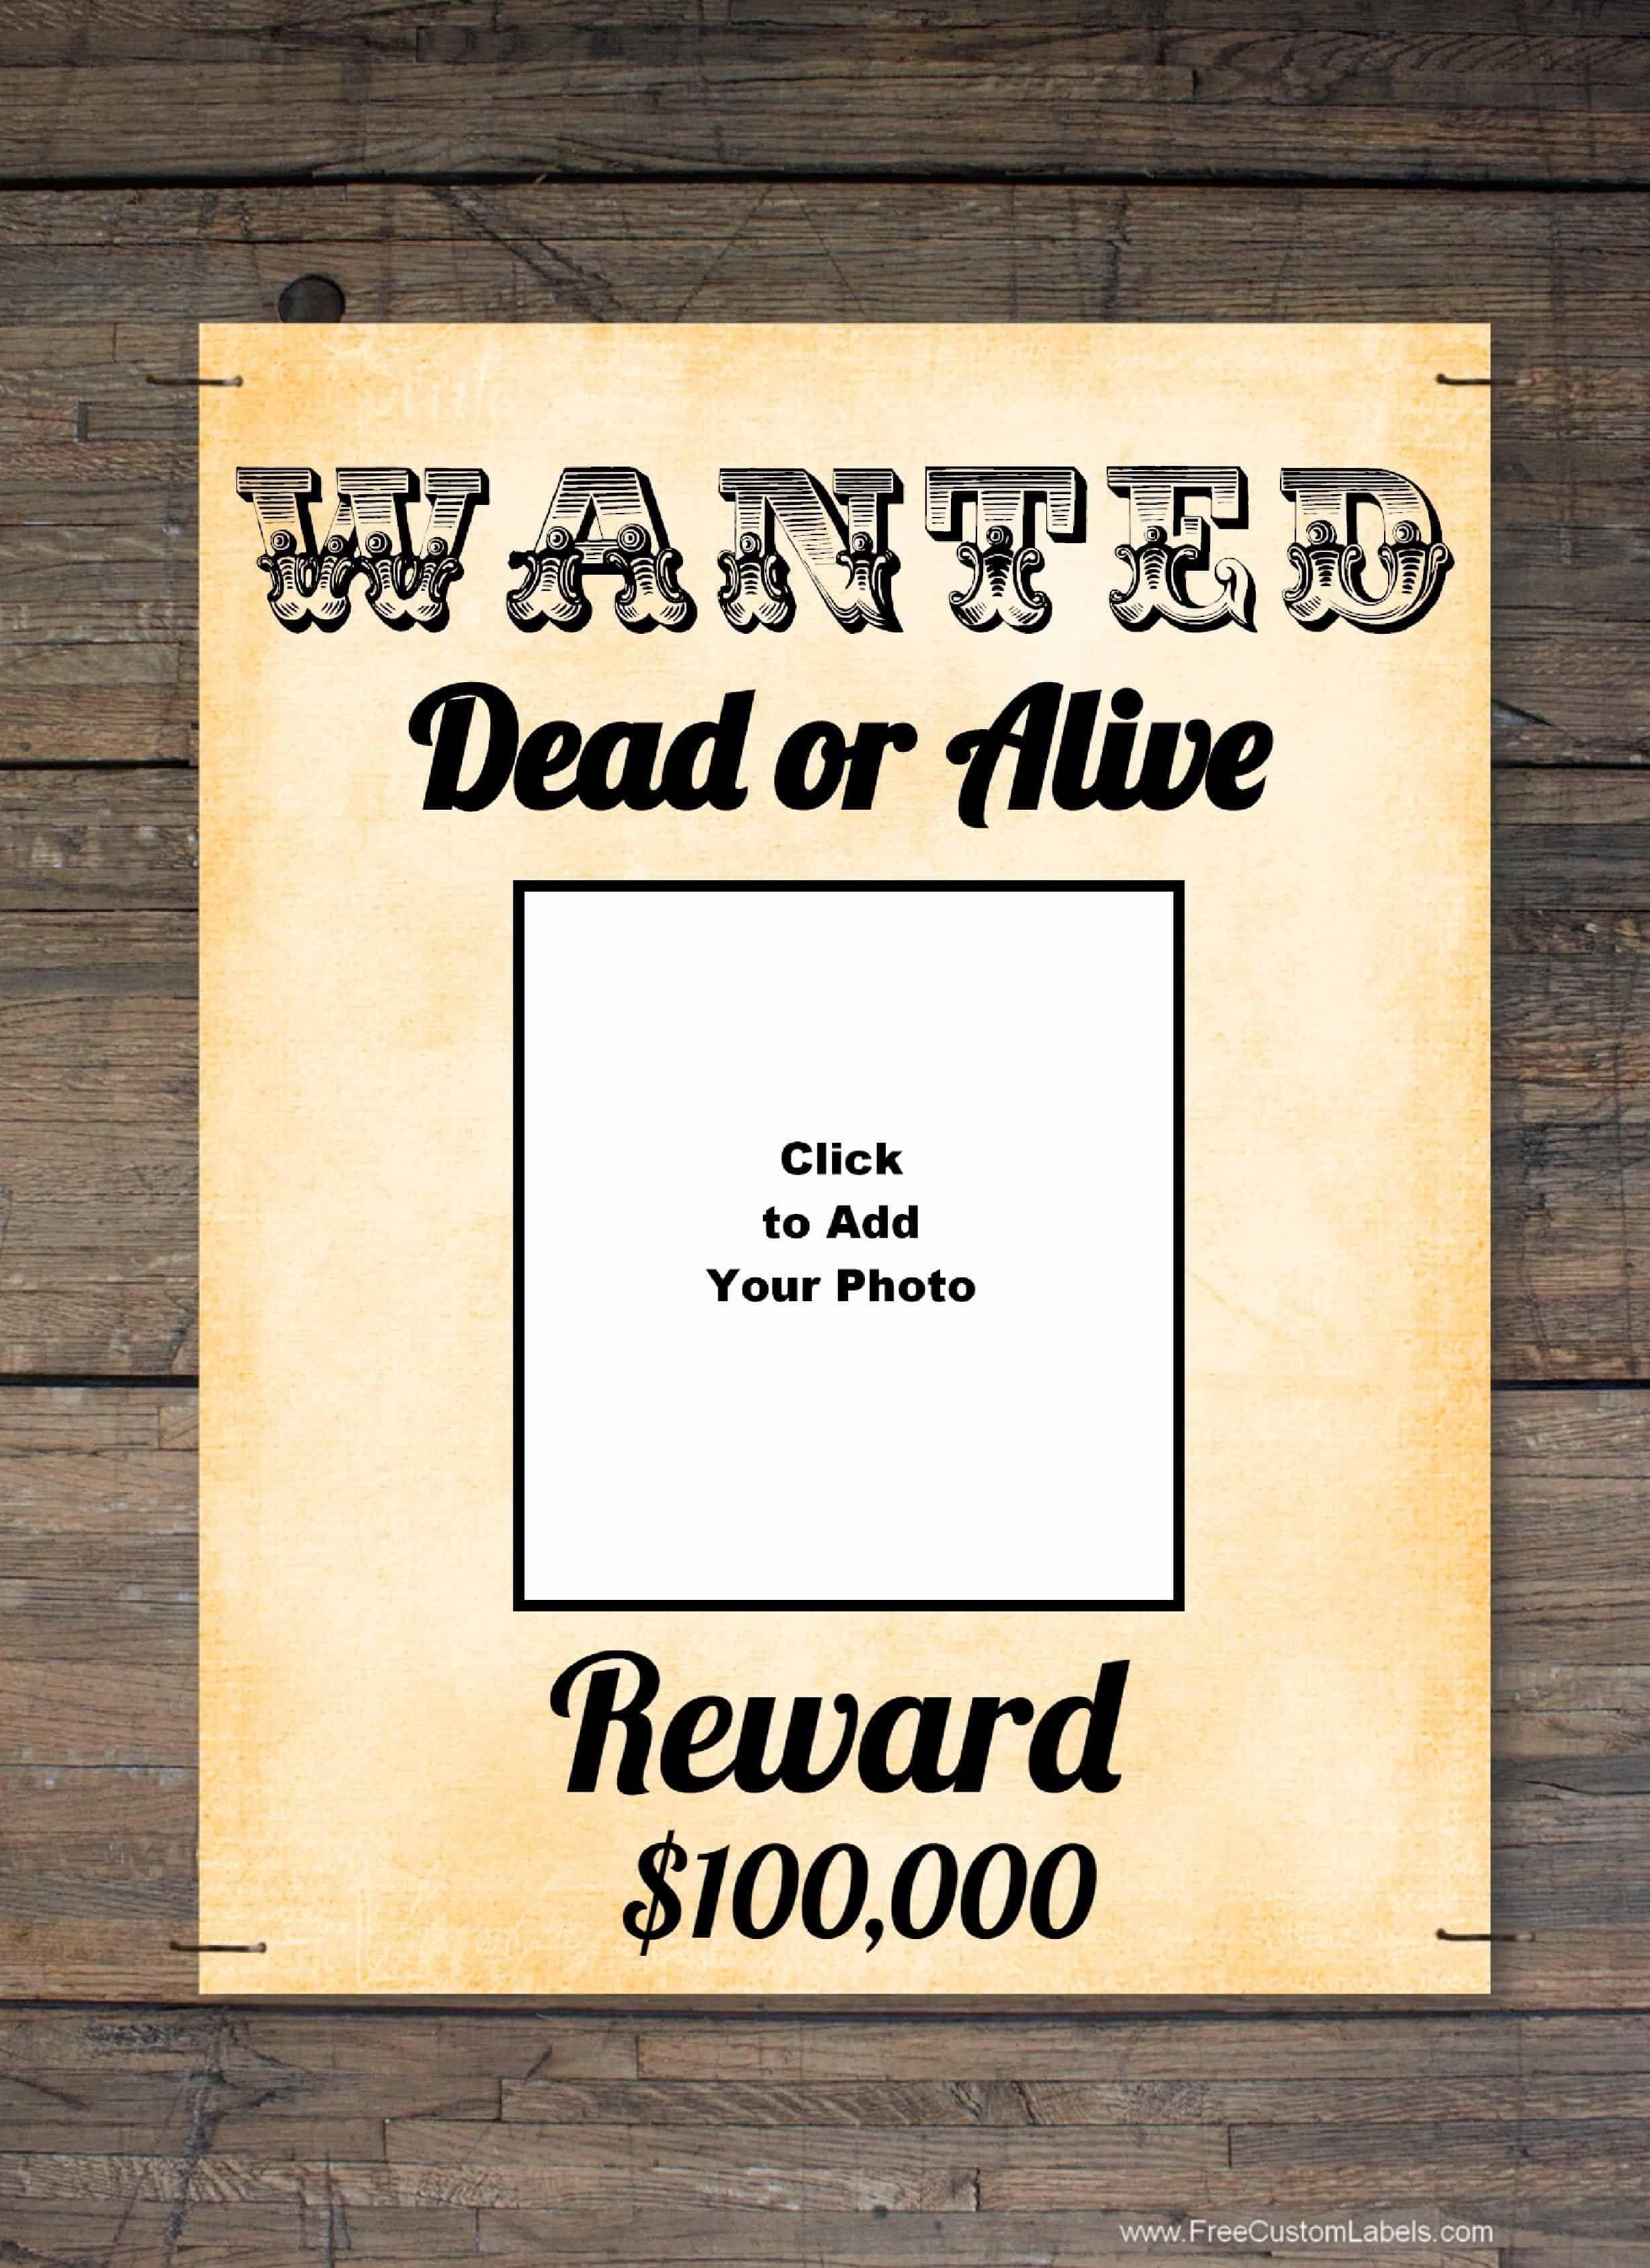 Wanted Poster Template Free Online